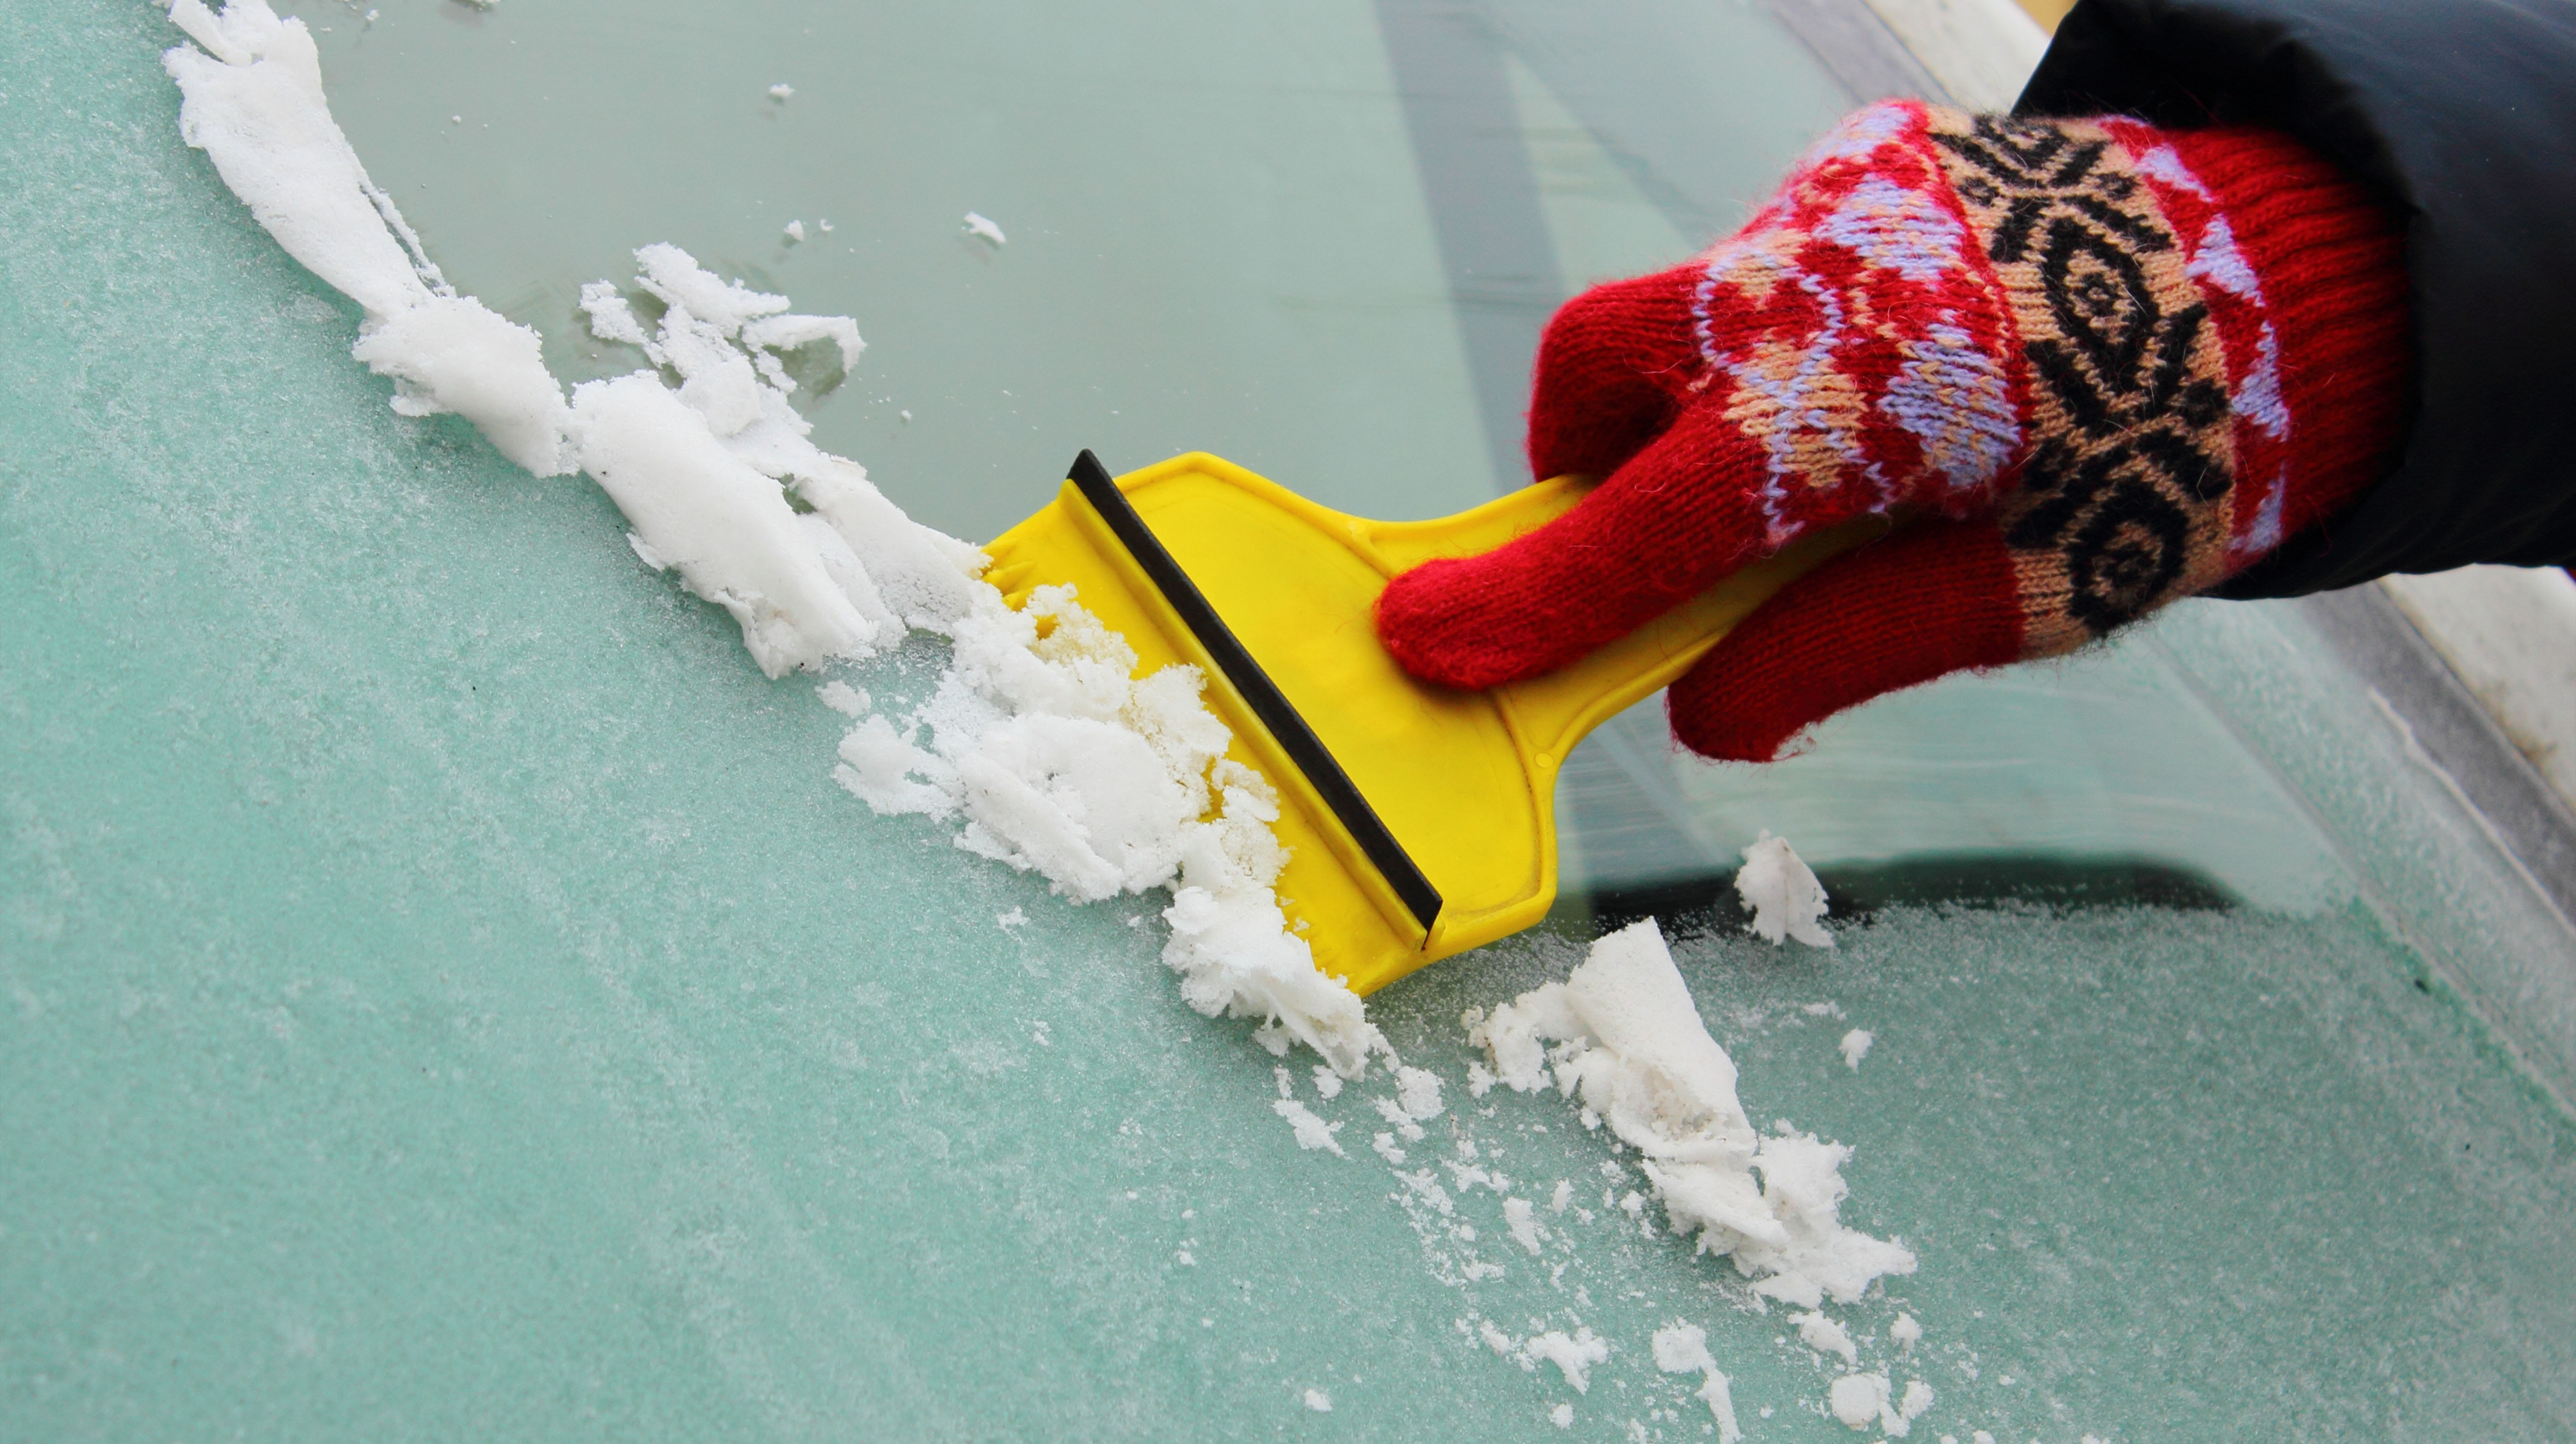 Winterize Your Vehicle